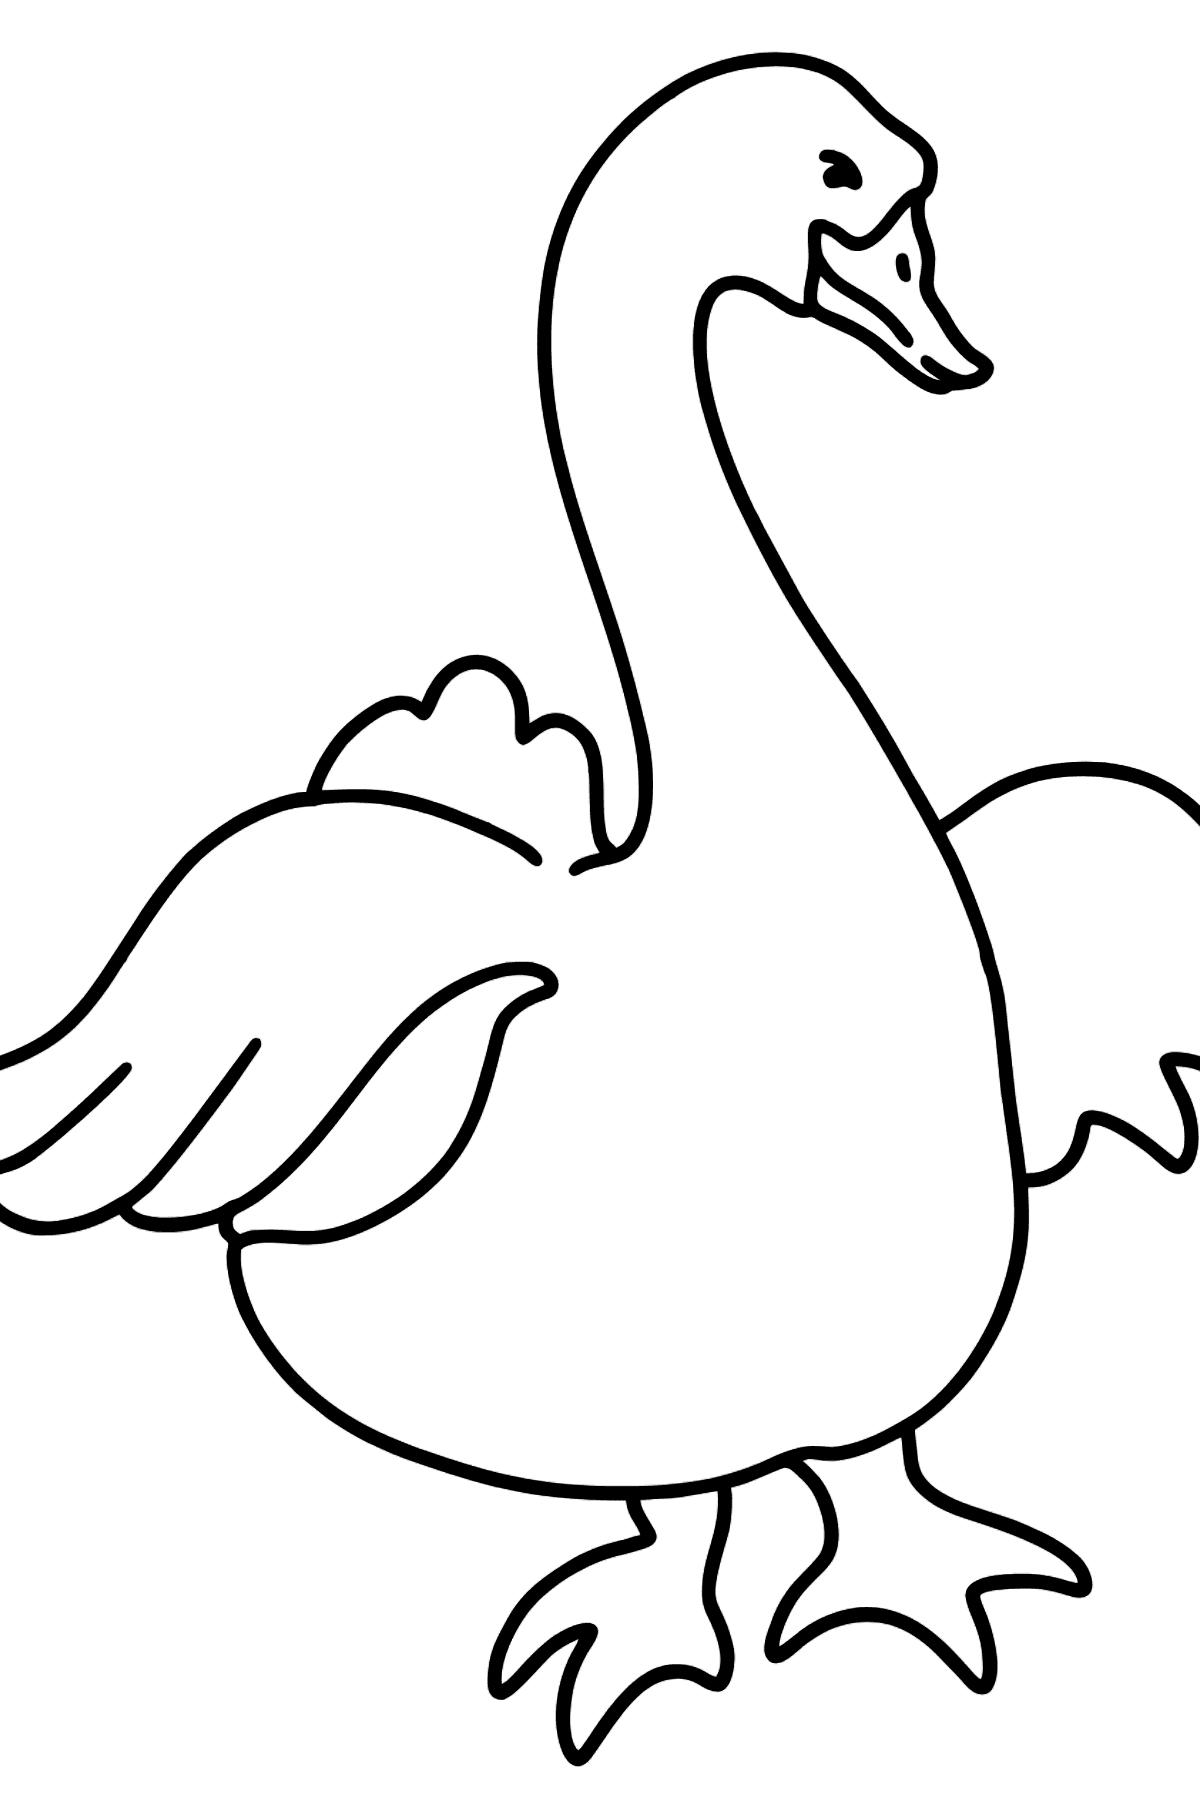 Goose coloring page - Coloring Pages for Kids